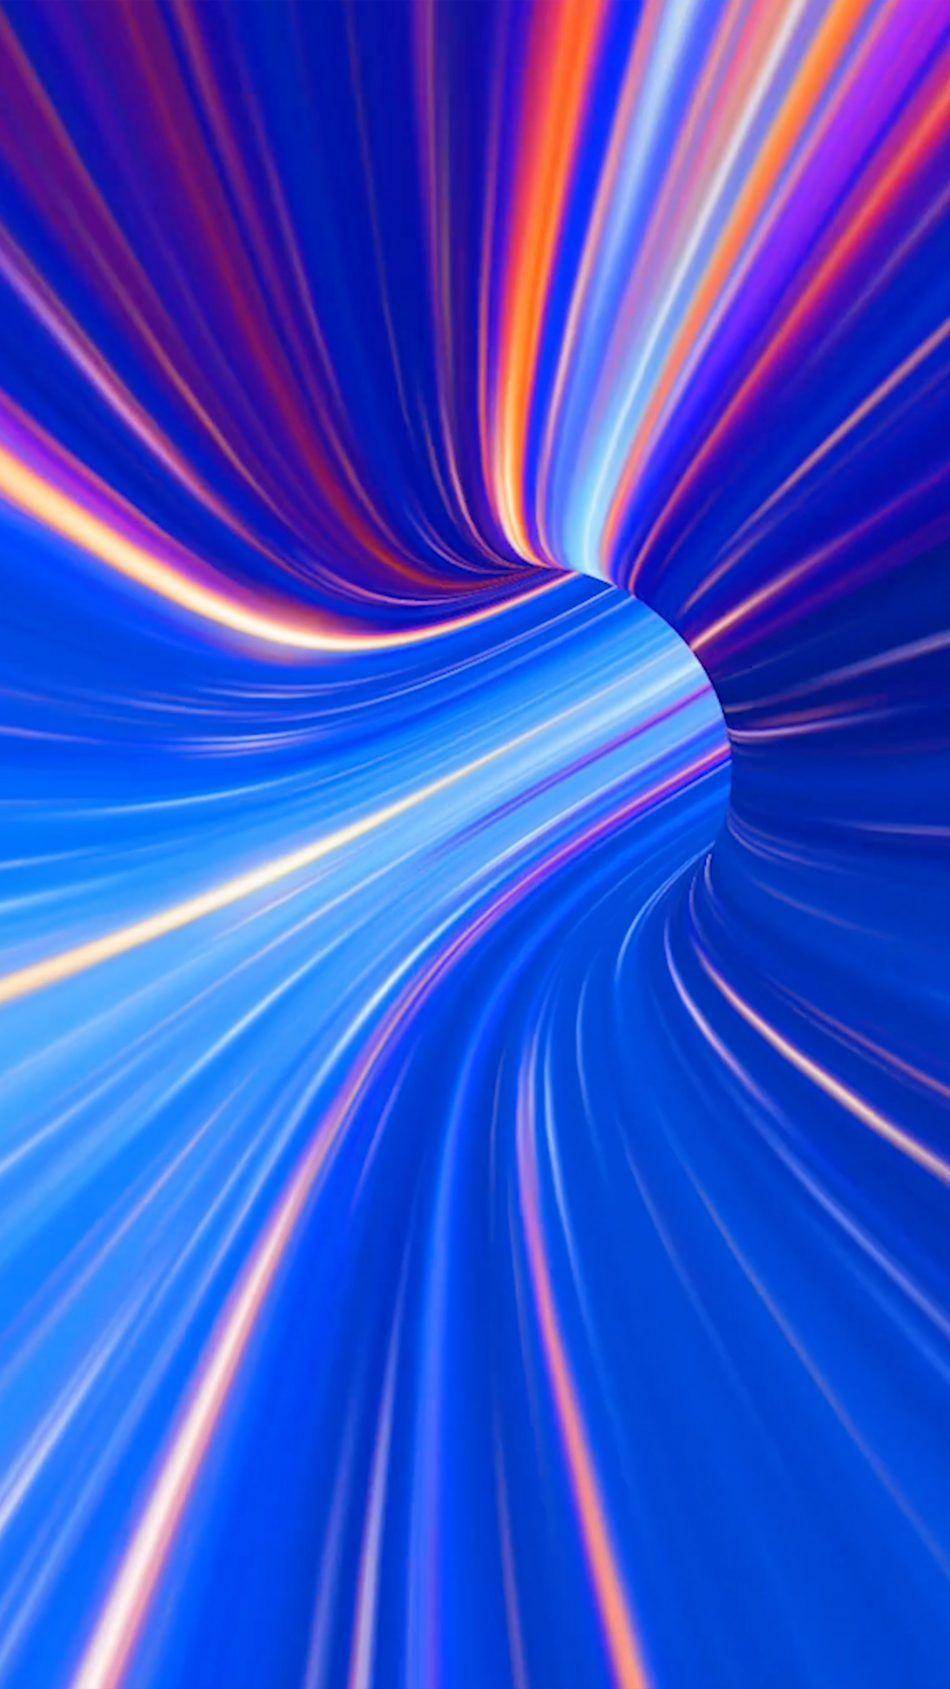 Spectrum Colorful Waves Tunnel 4K Ultra HD Mobile Wallpaper. Rainbow wallpaper, Mobile wallpaper, Wall paper phone